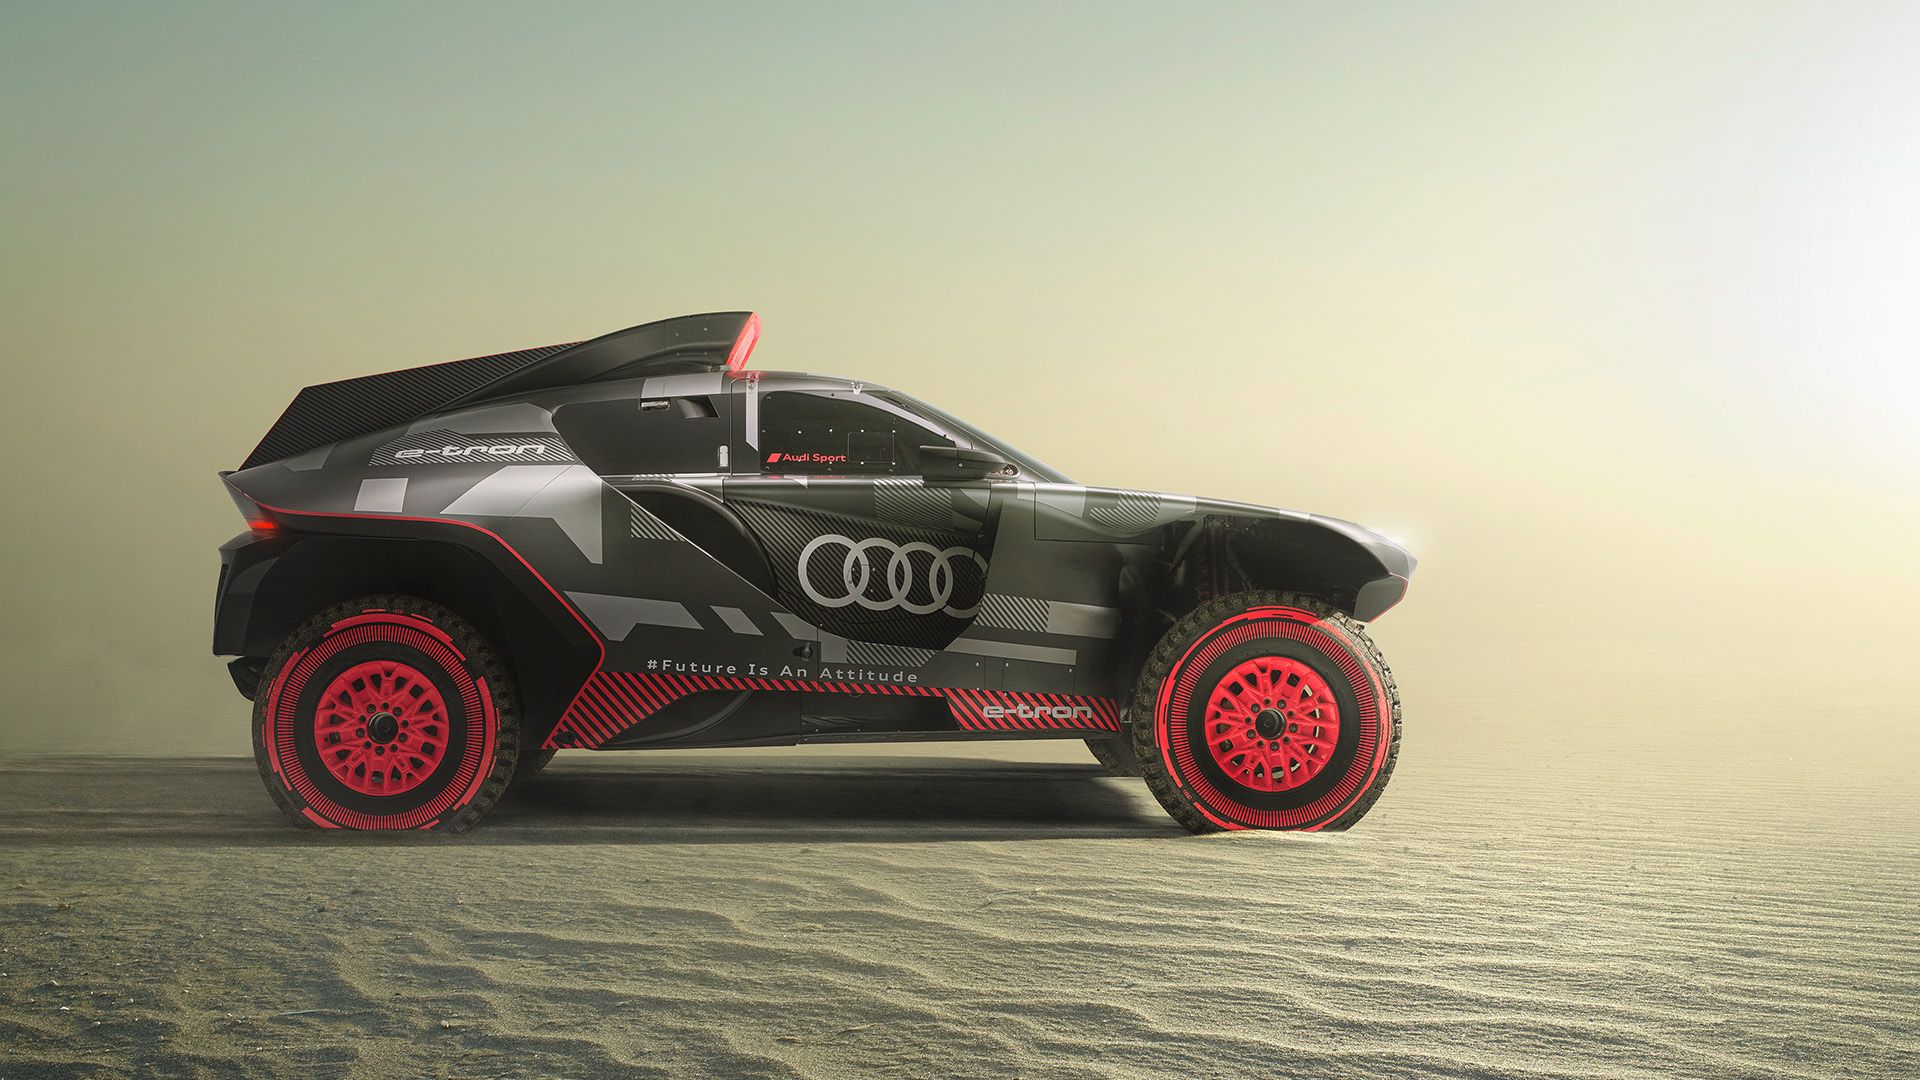 Profile view of the Audi RS Q e-tron, the vehicle for the Dakar Rally.